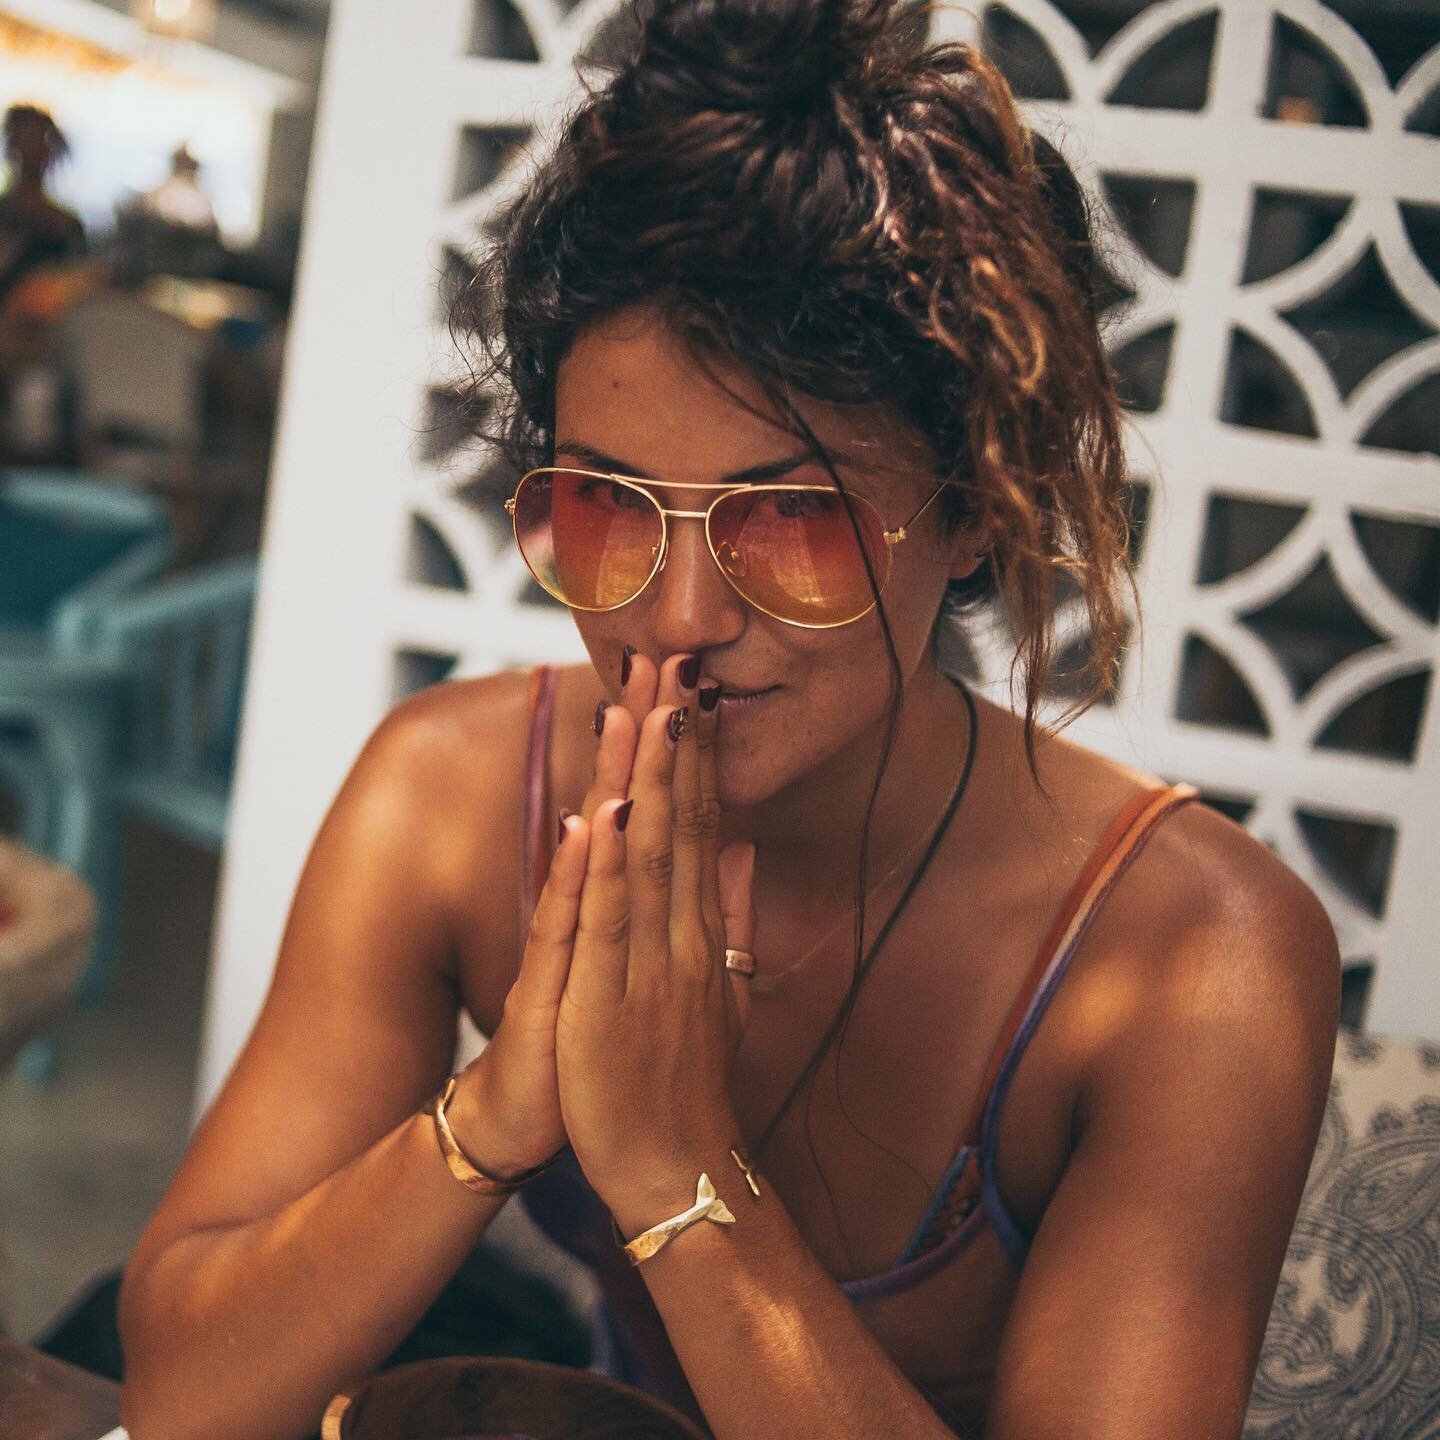 Our first 💕 #dogbeachjewelry model, the heart-stirring, #wildgypsea soul @kellyyazdi in #baliindonesia rocking her #heartwaves #dolphintail cuffs and #asimplesandylife ring.  If you don&rsquo;t know her yet, follow her... we promise you won&rsquo;t 